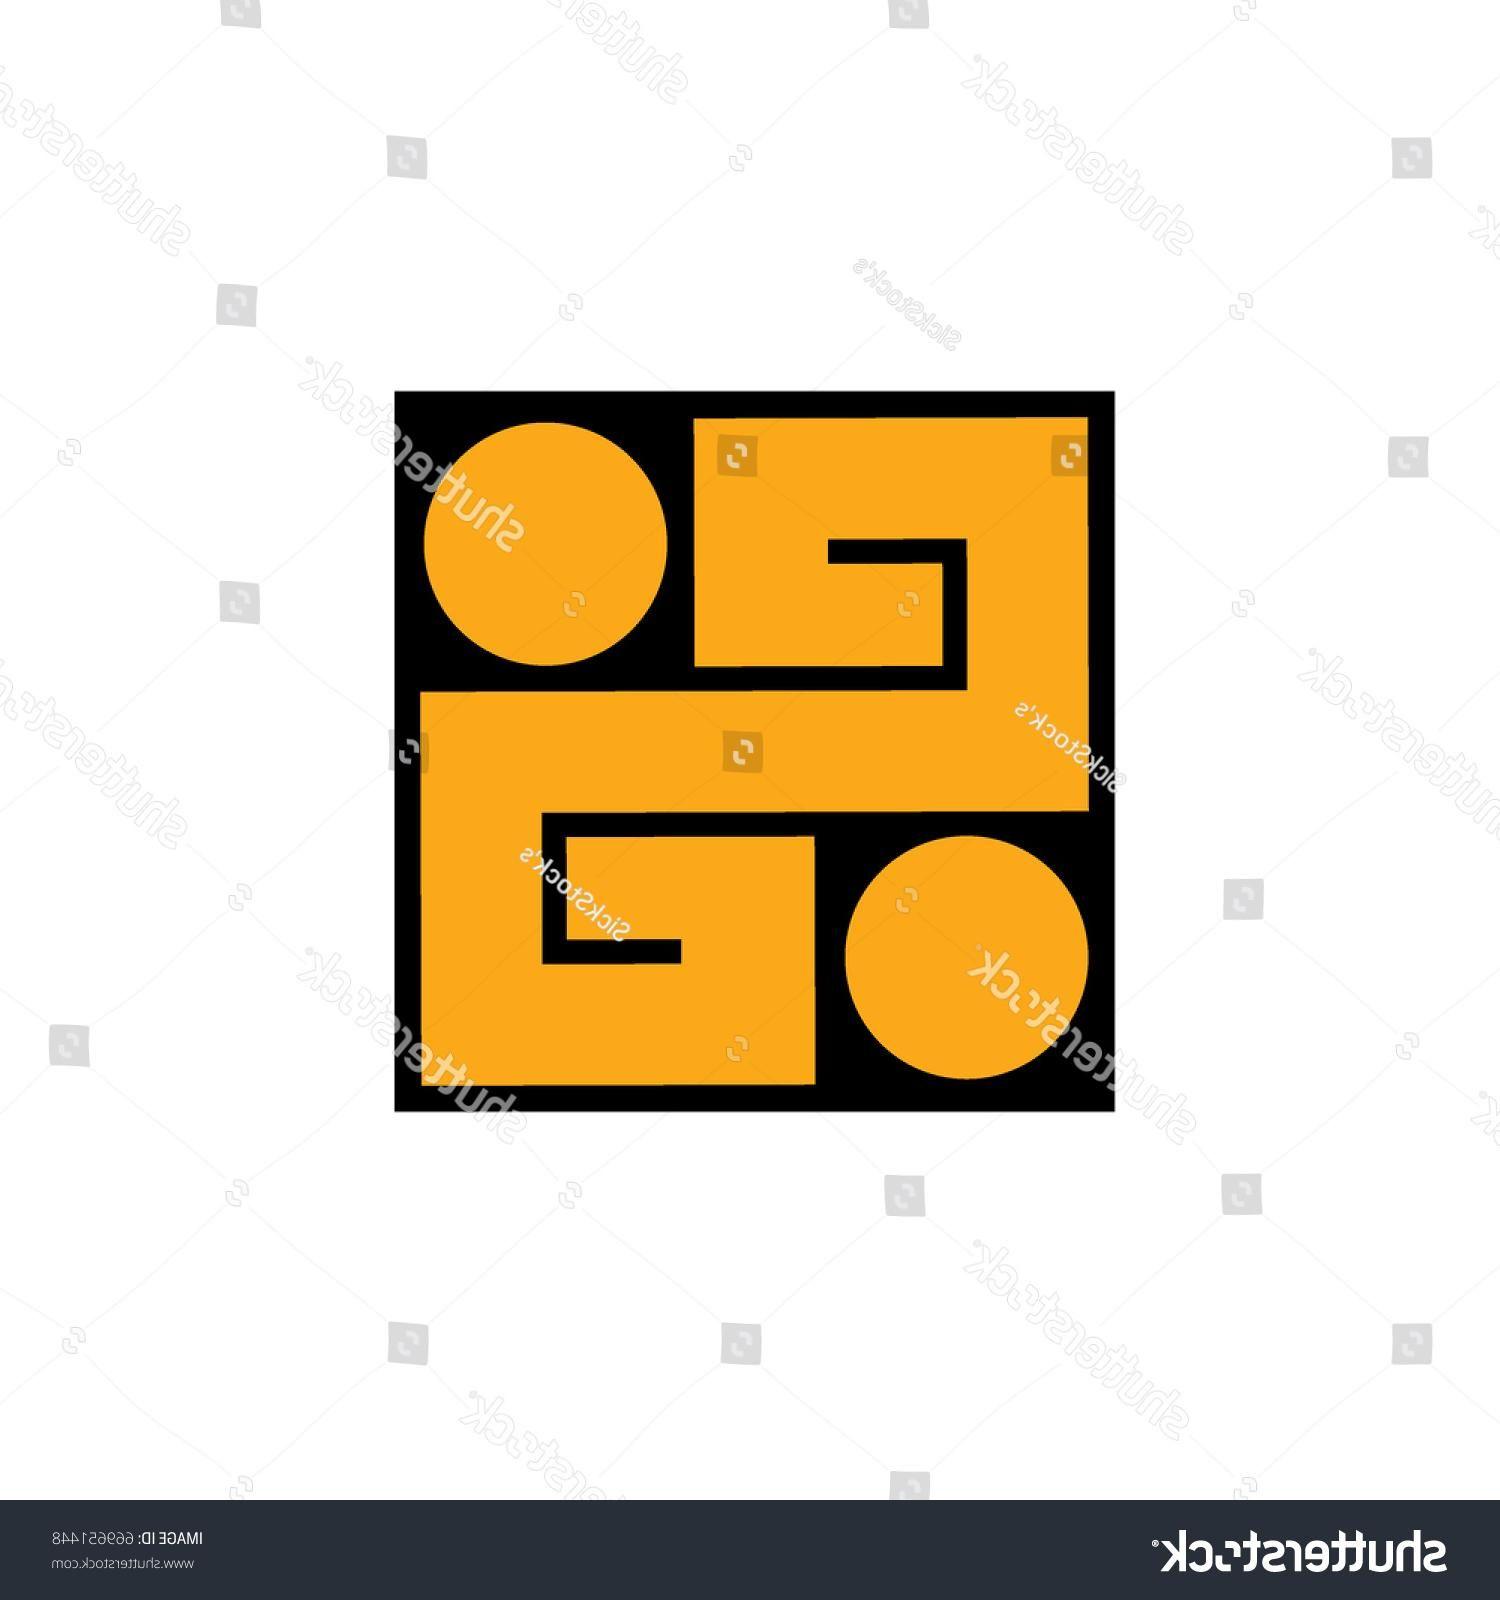 Square Shaped Logo - Top Square Shaped Objects Vector Cdr » Free Vector Art, Images ...